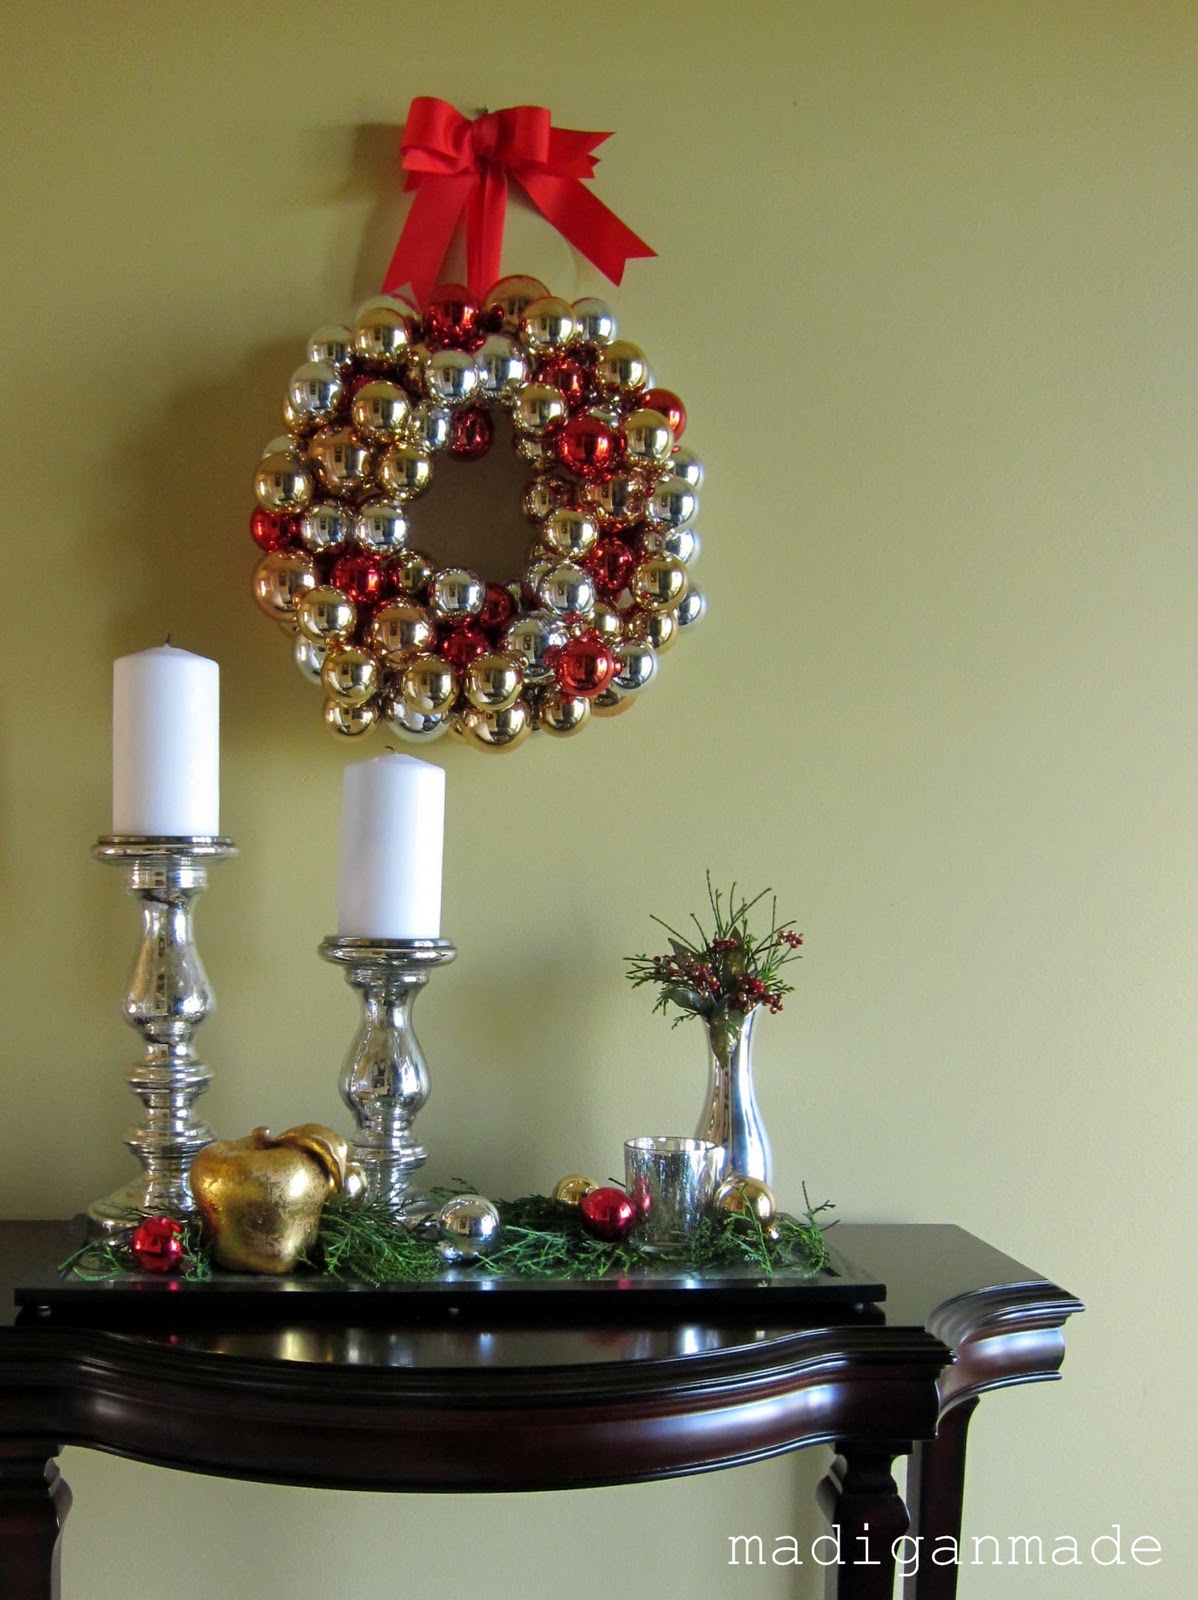 10 Simple DIY Holiday Ideas { gifts, crafts, décor }